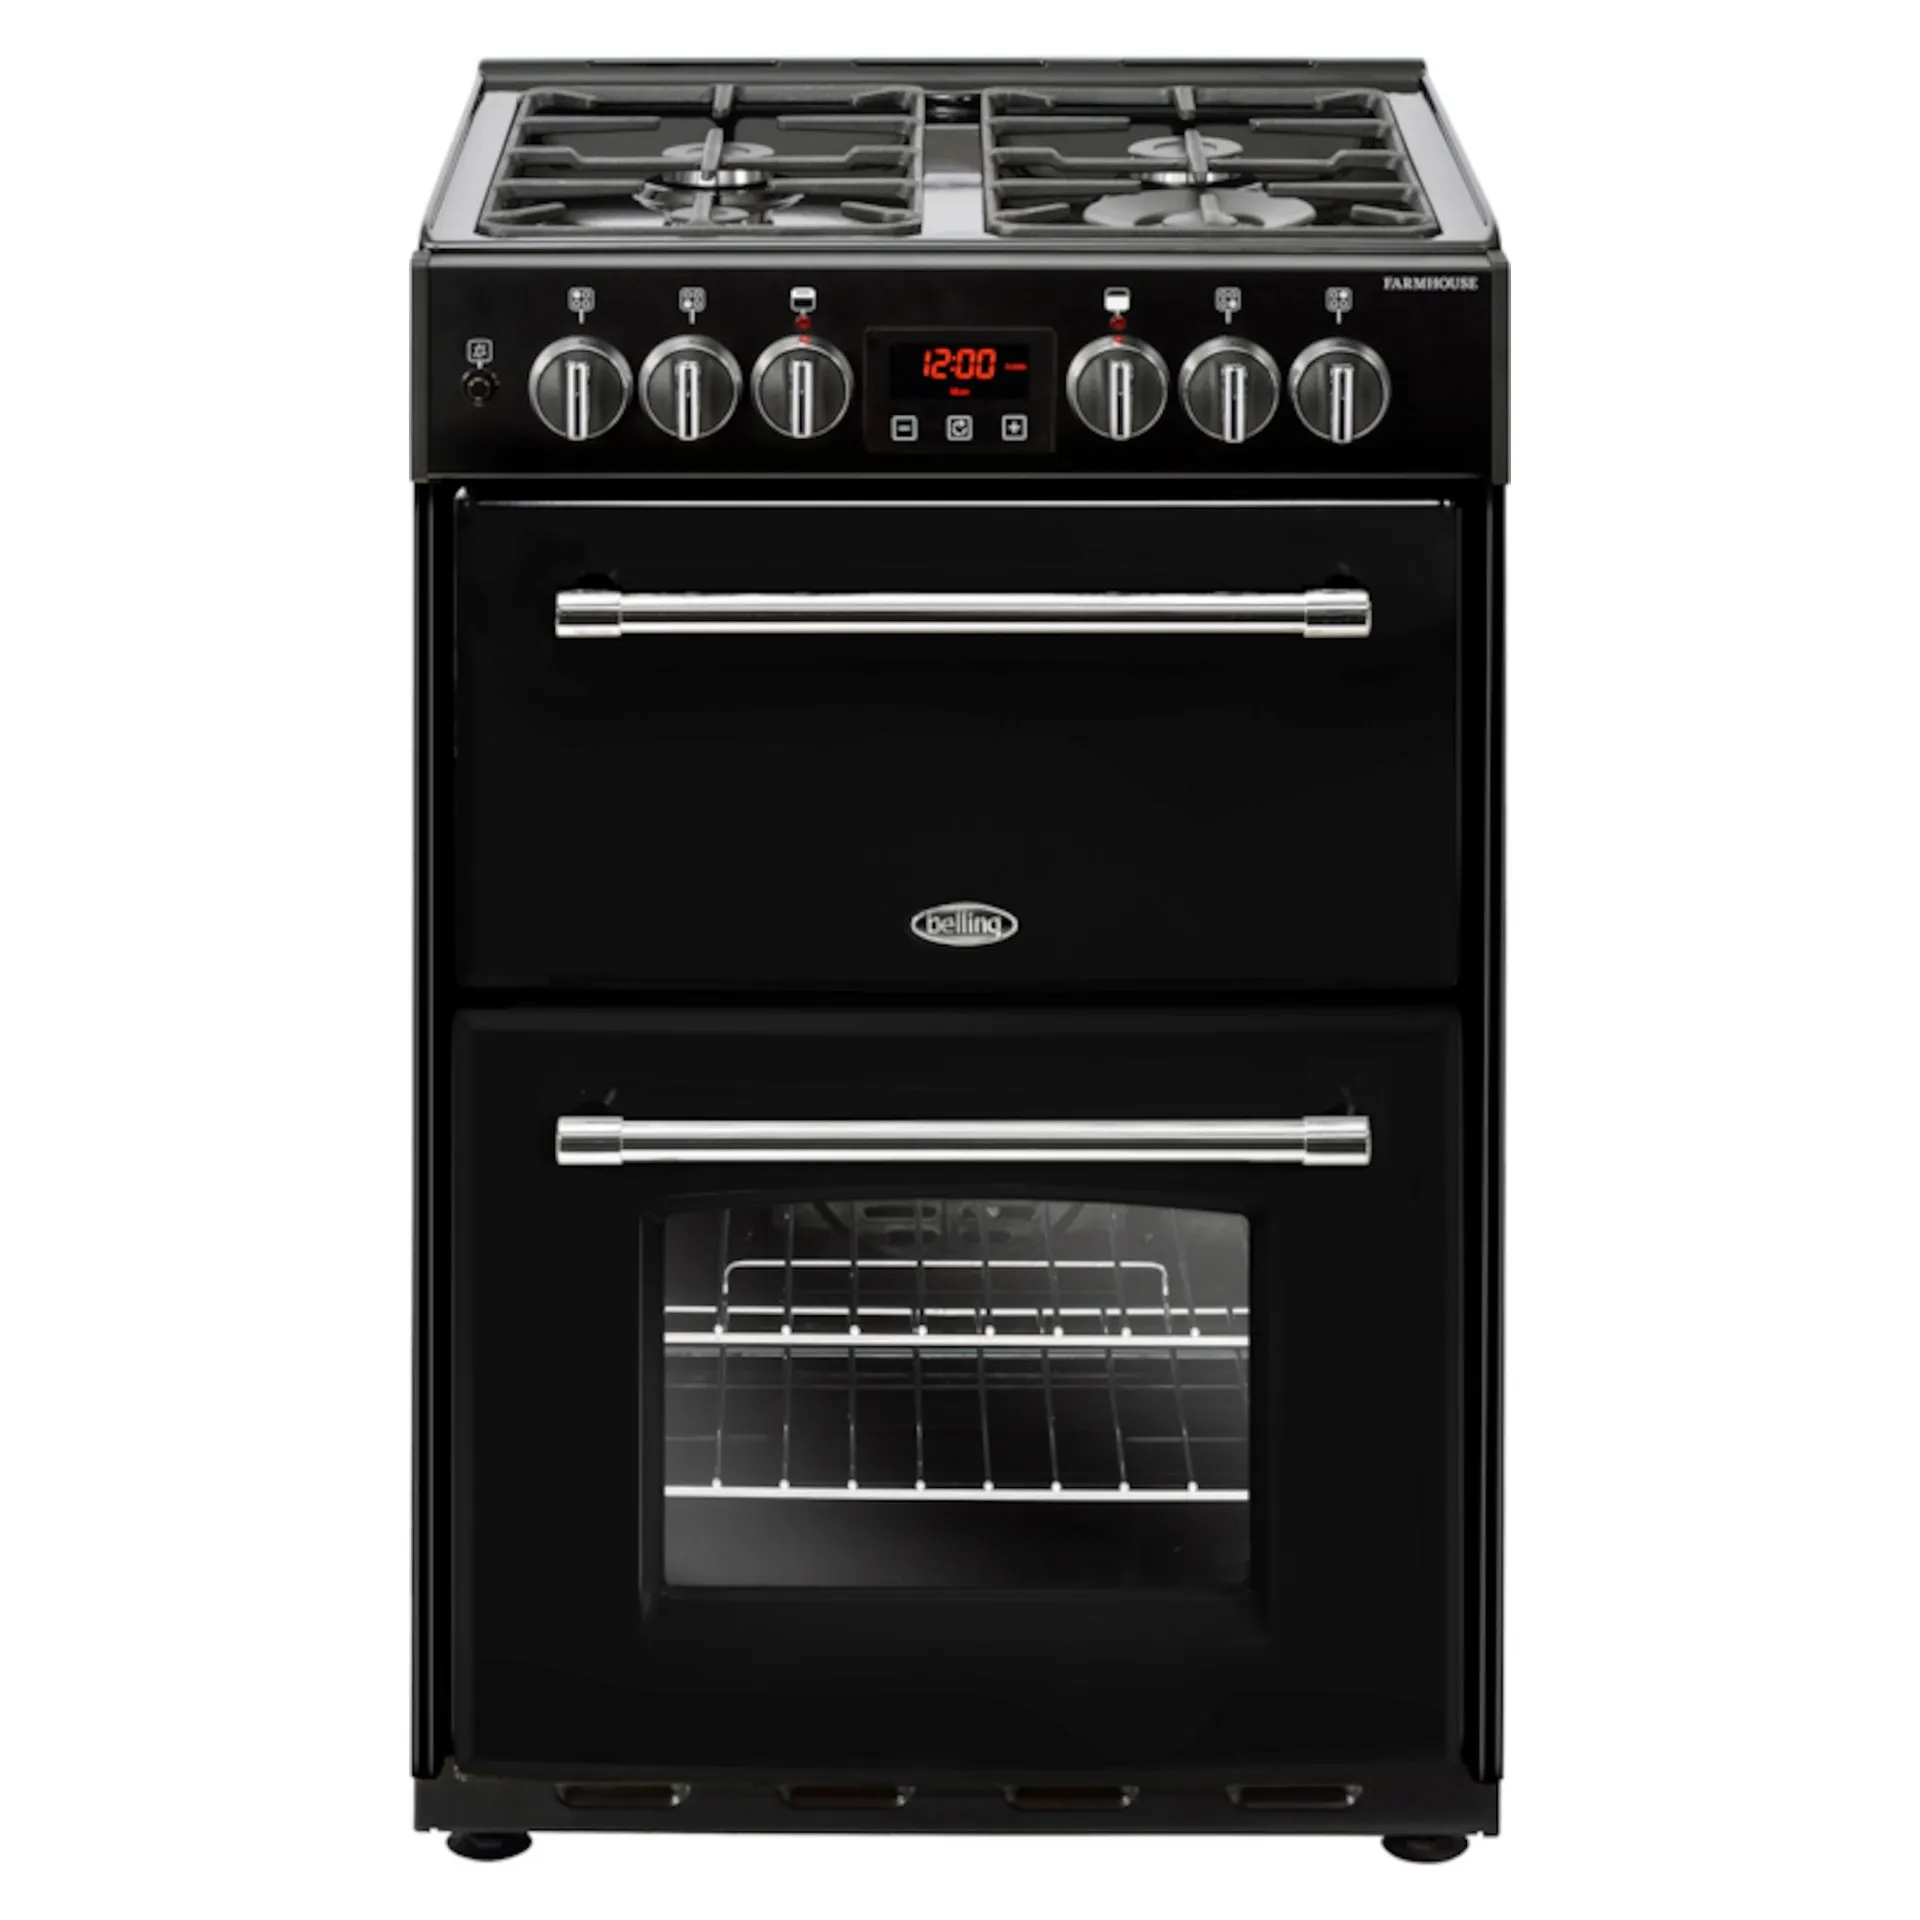 Belling FARMHOUSE60DFBLK Gas Hob with Electric Oven - Black